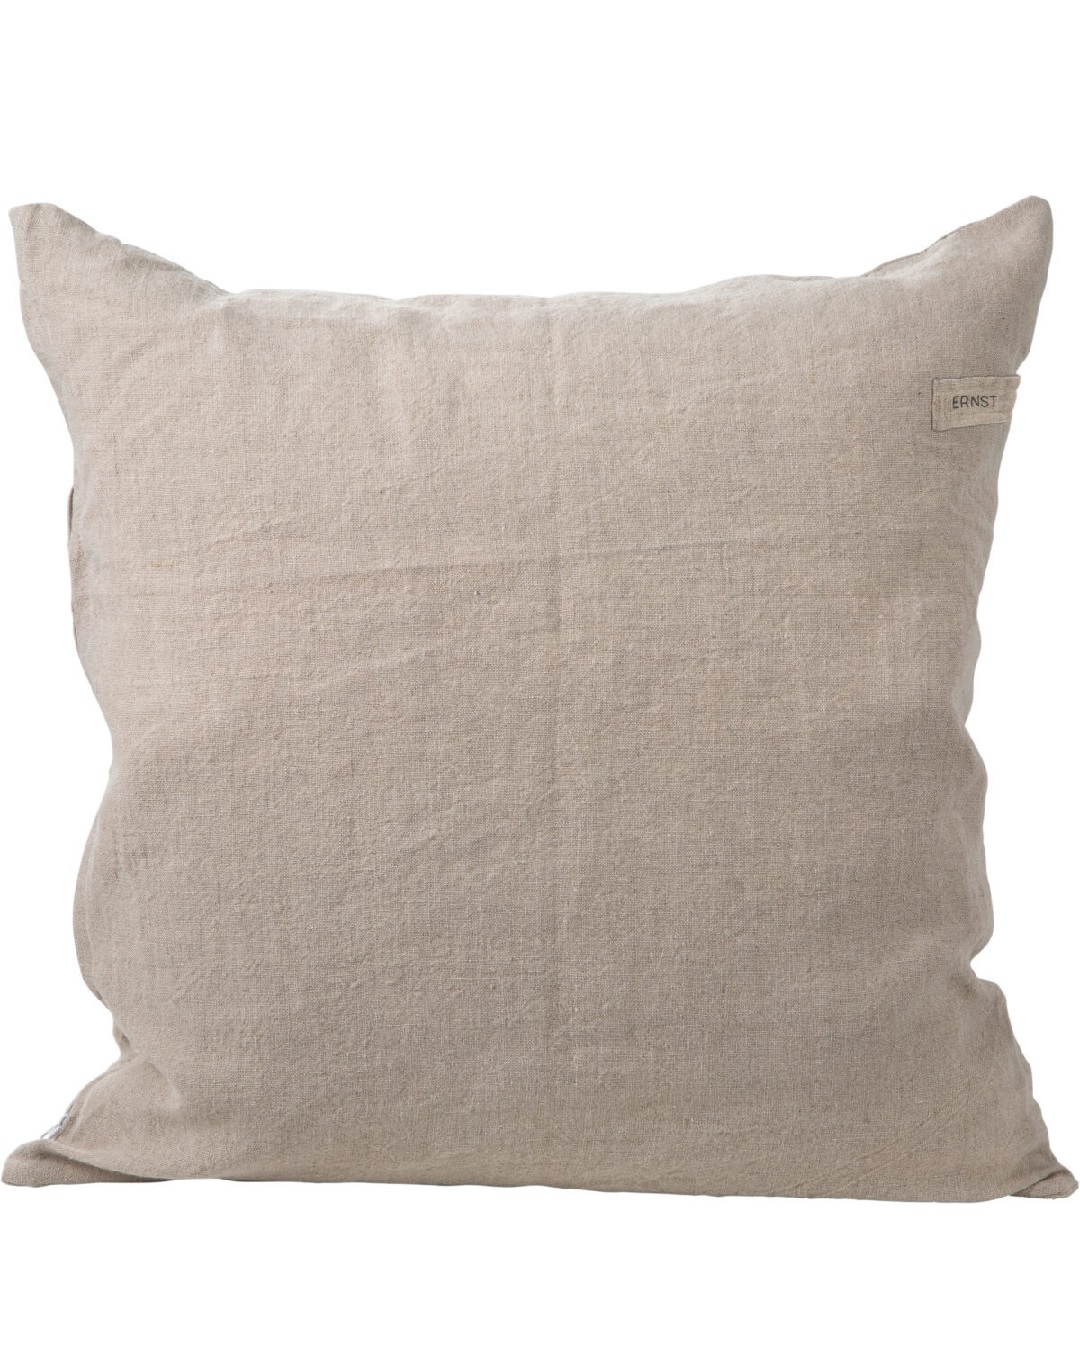 Ernst cushion cover nature